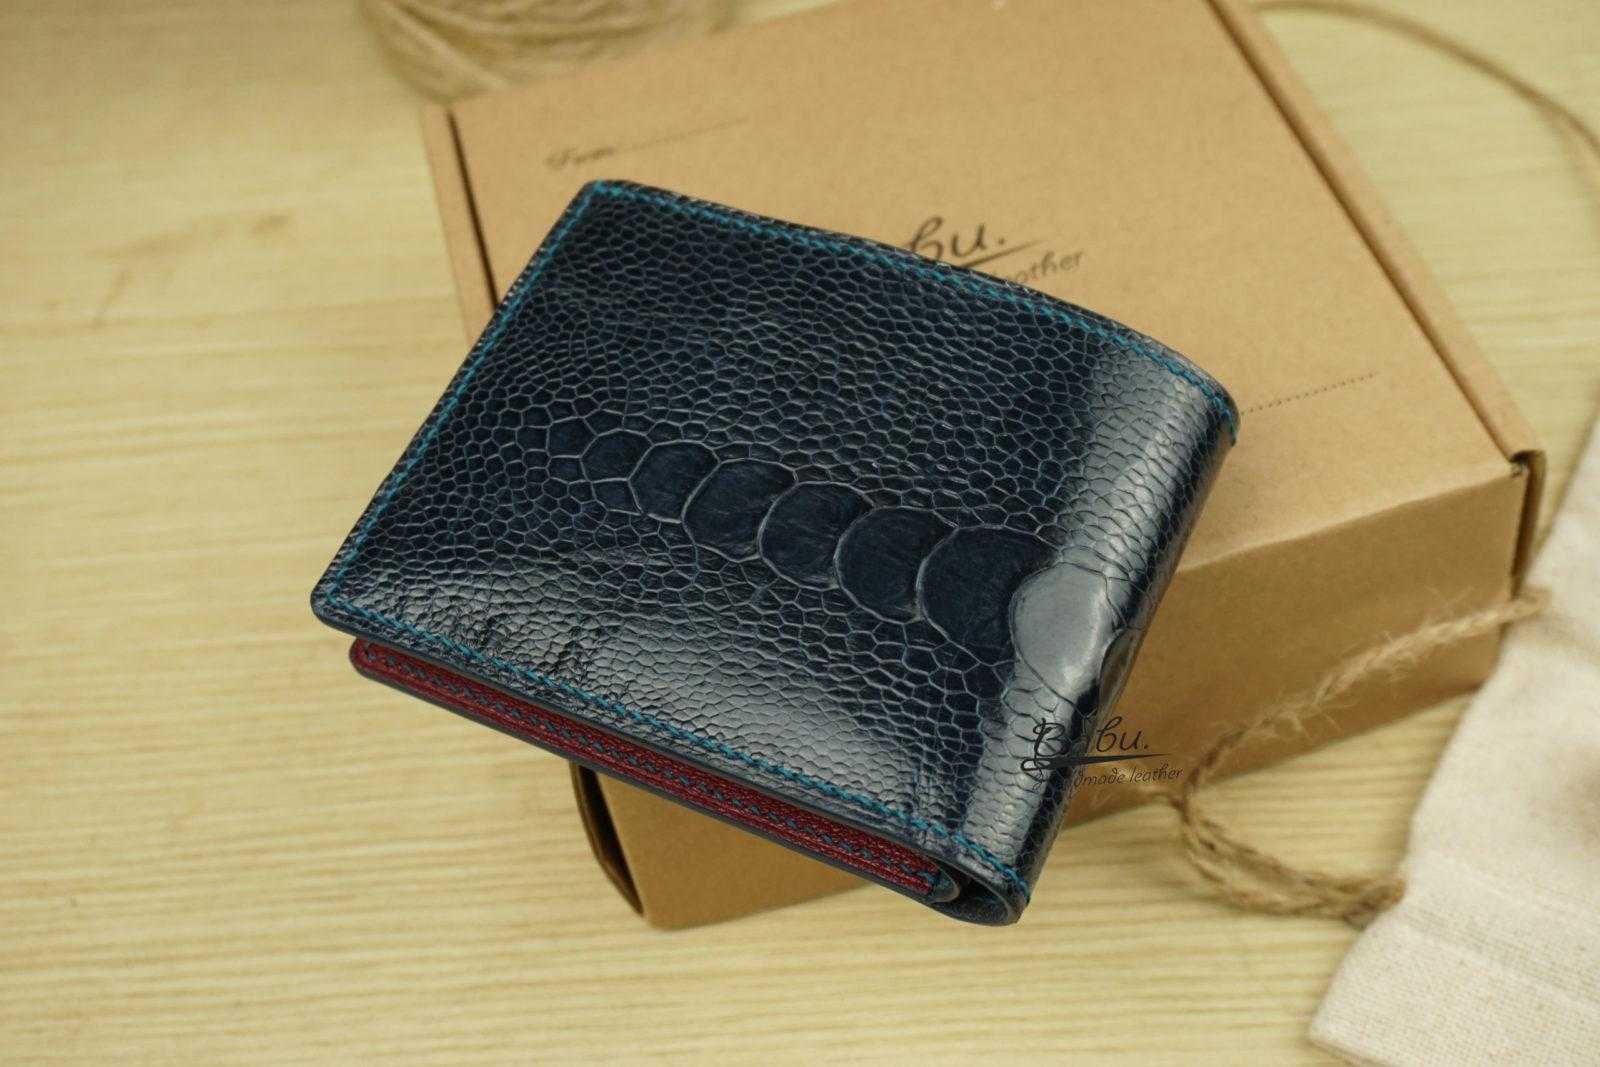 Ostrich Wallet → Real Ostrich Leather → Green Ostrich Skin Wallet → Matching Ostrich Leather Interior